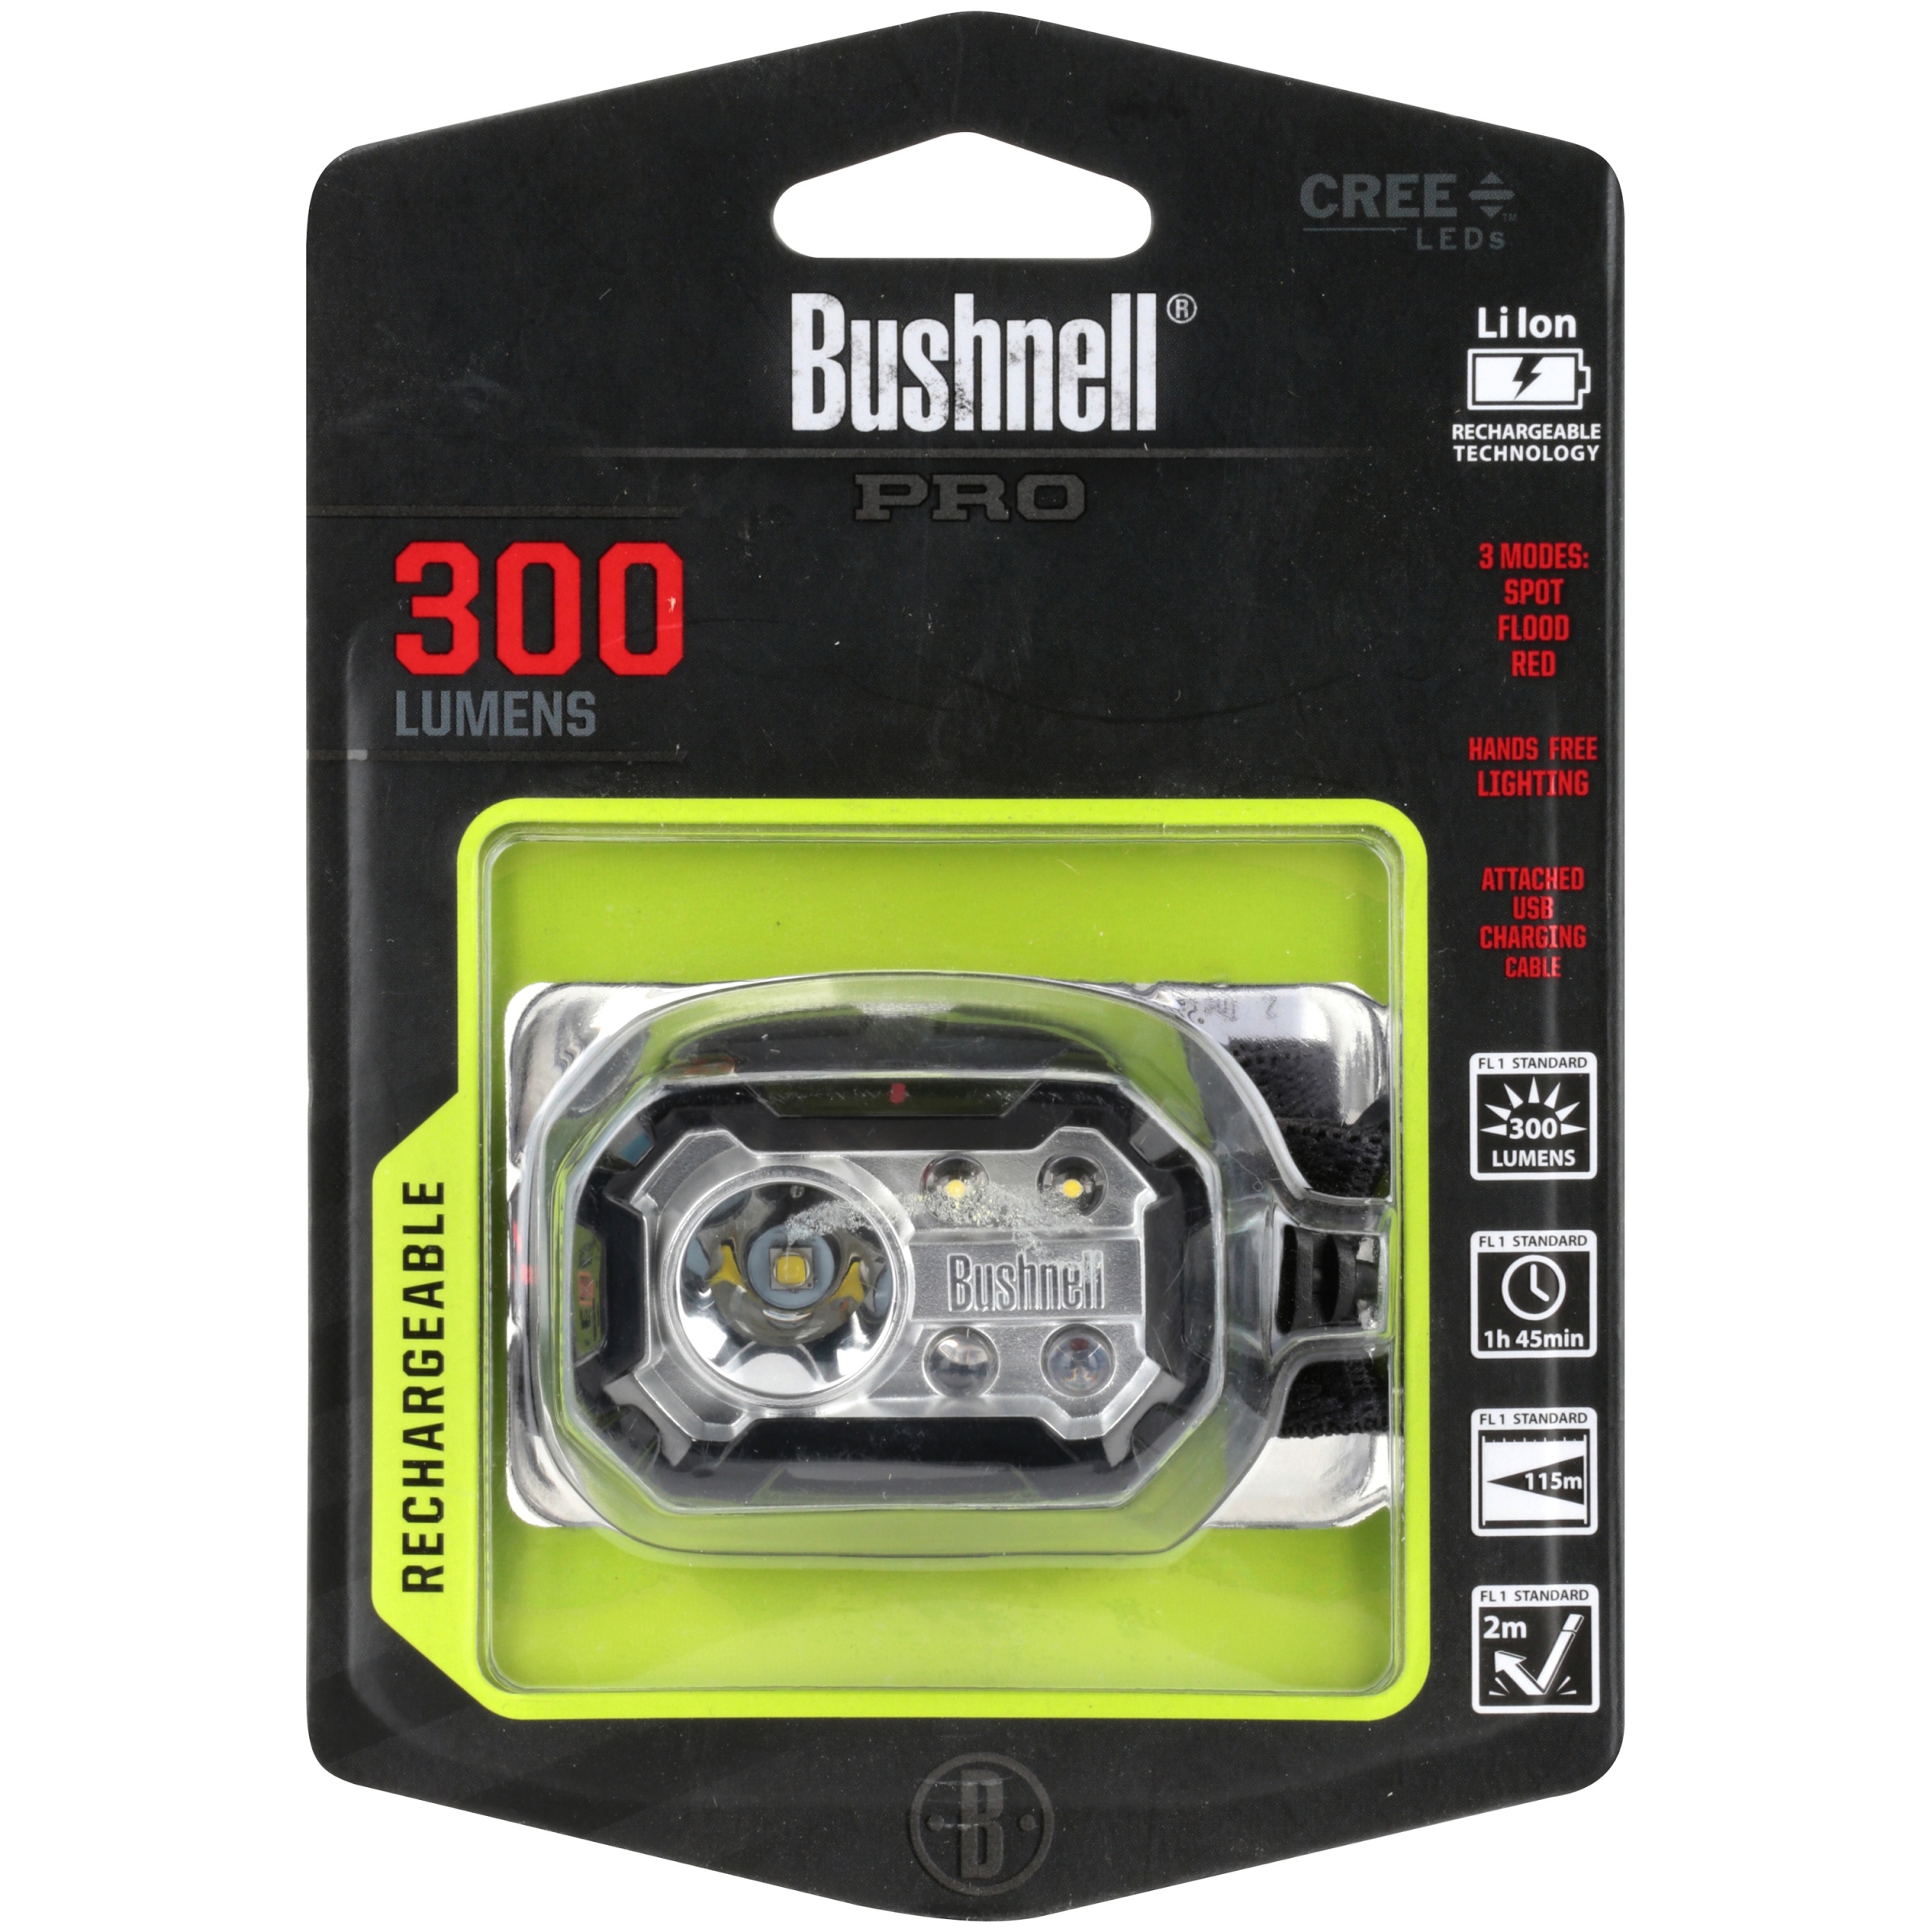 Bushnell Pro Rechargeable 300L Headlamp - image 2 of 6